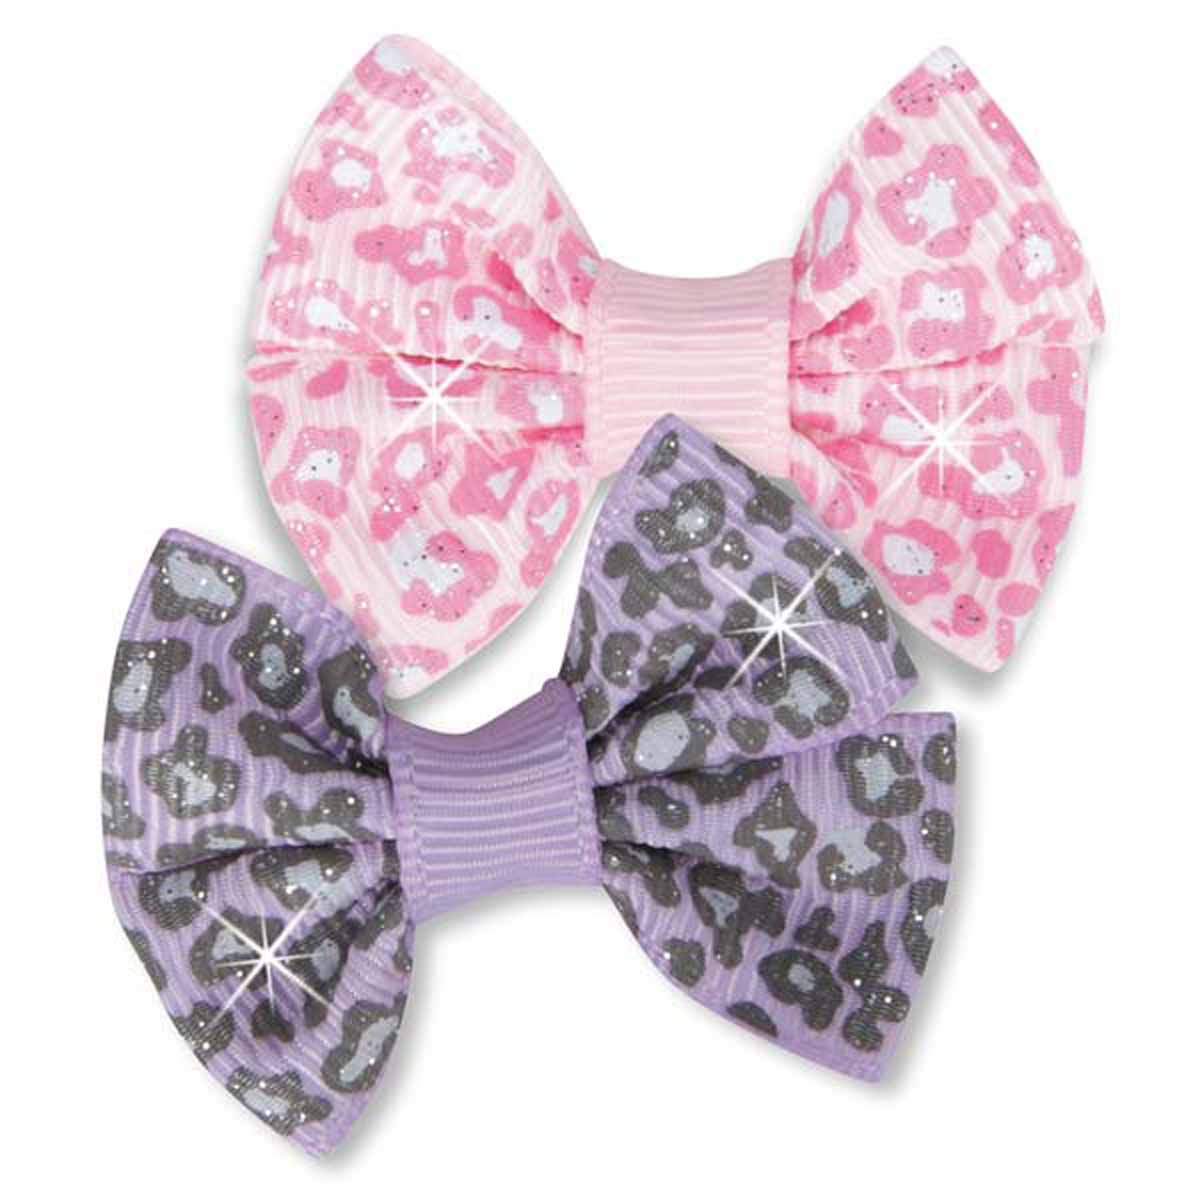 Dt9986 48 Romy Dog Bows - 6 Assorted Bows